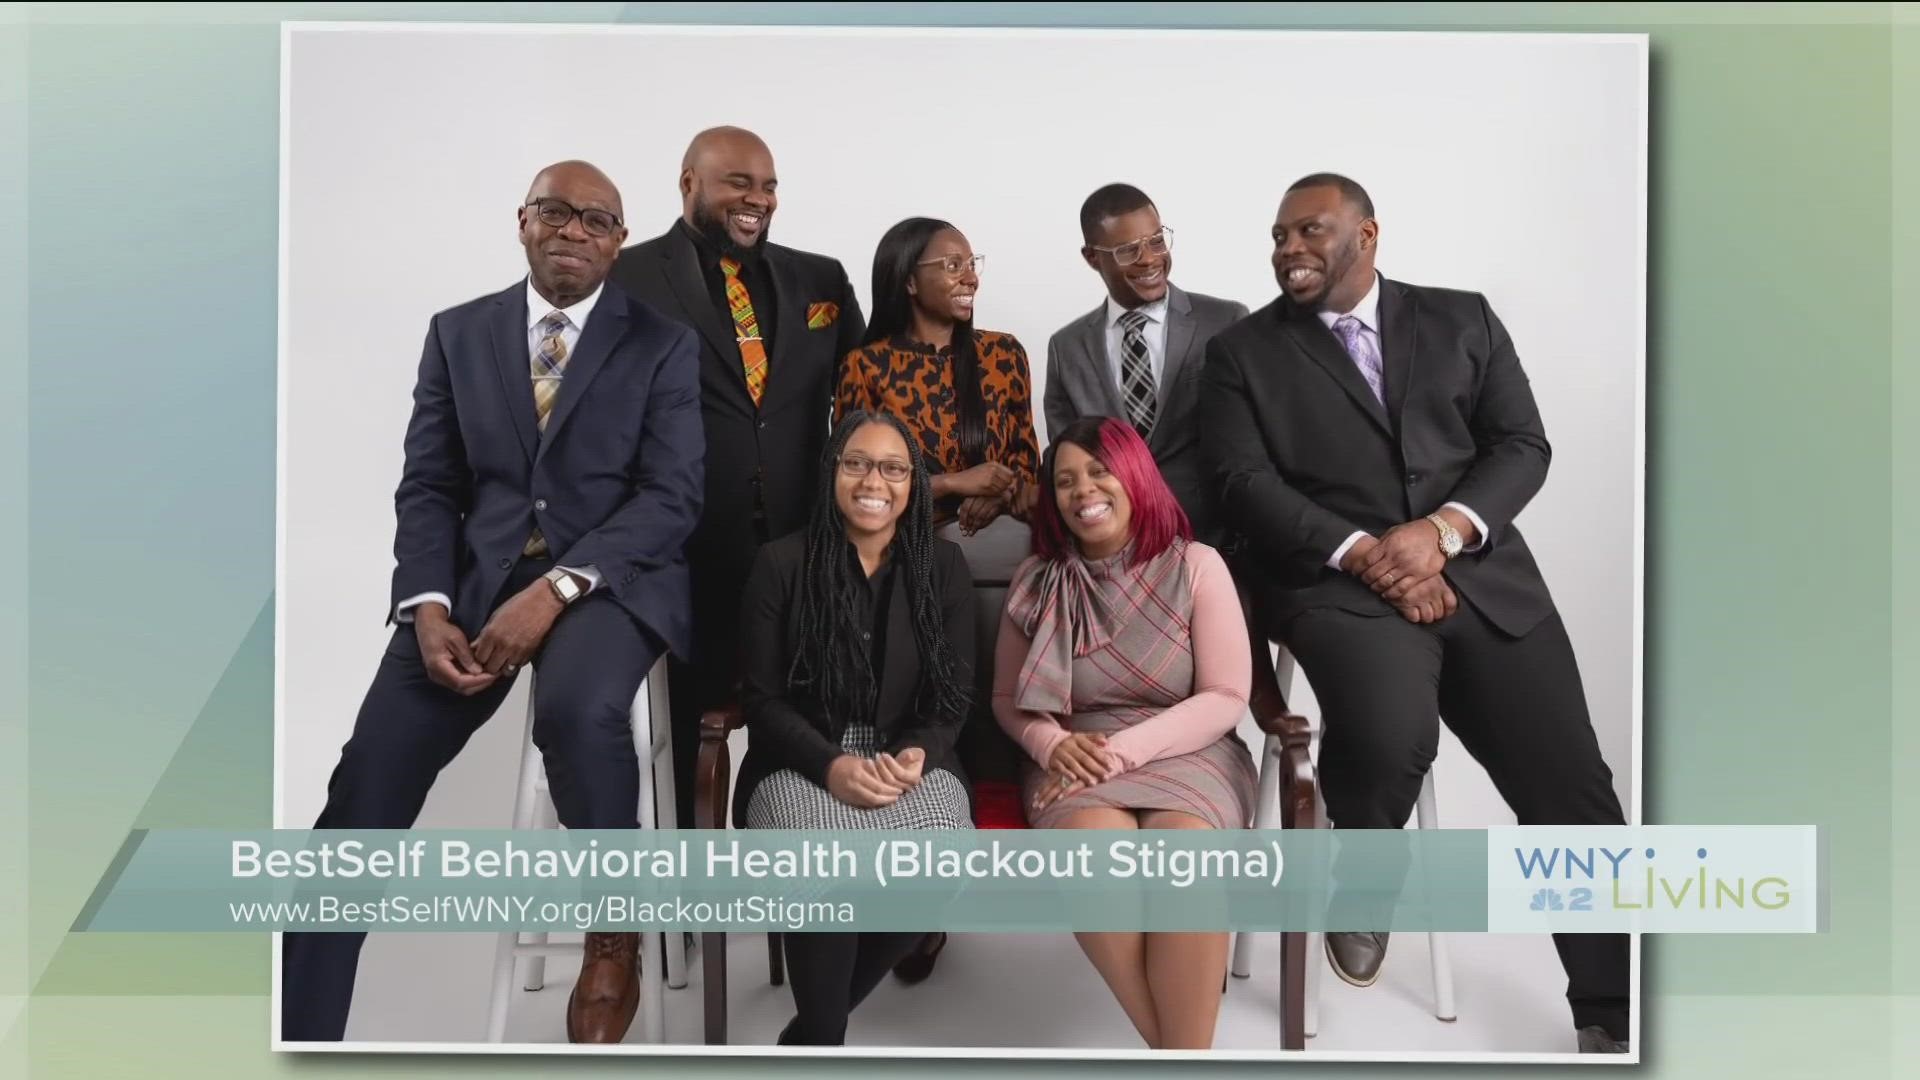 WNY Living- March 4th - BestSelf Behavioral Health Black Out Stigma- THIS VIDEO IS SPONSORED BY BESTSELF BEHAVIORAL HEALTH